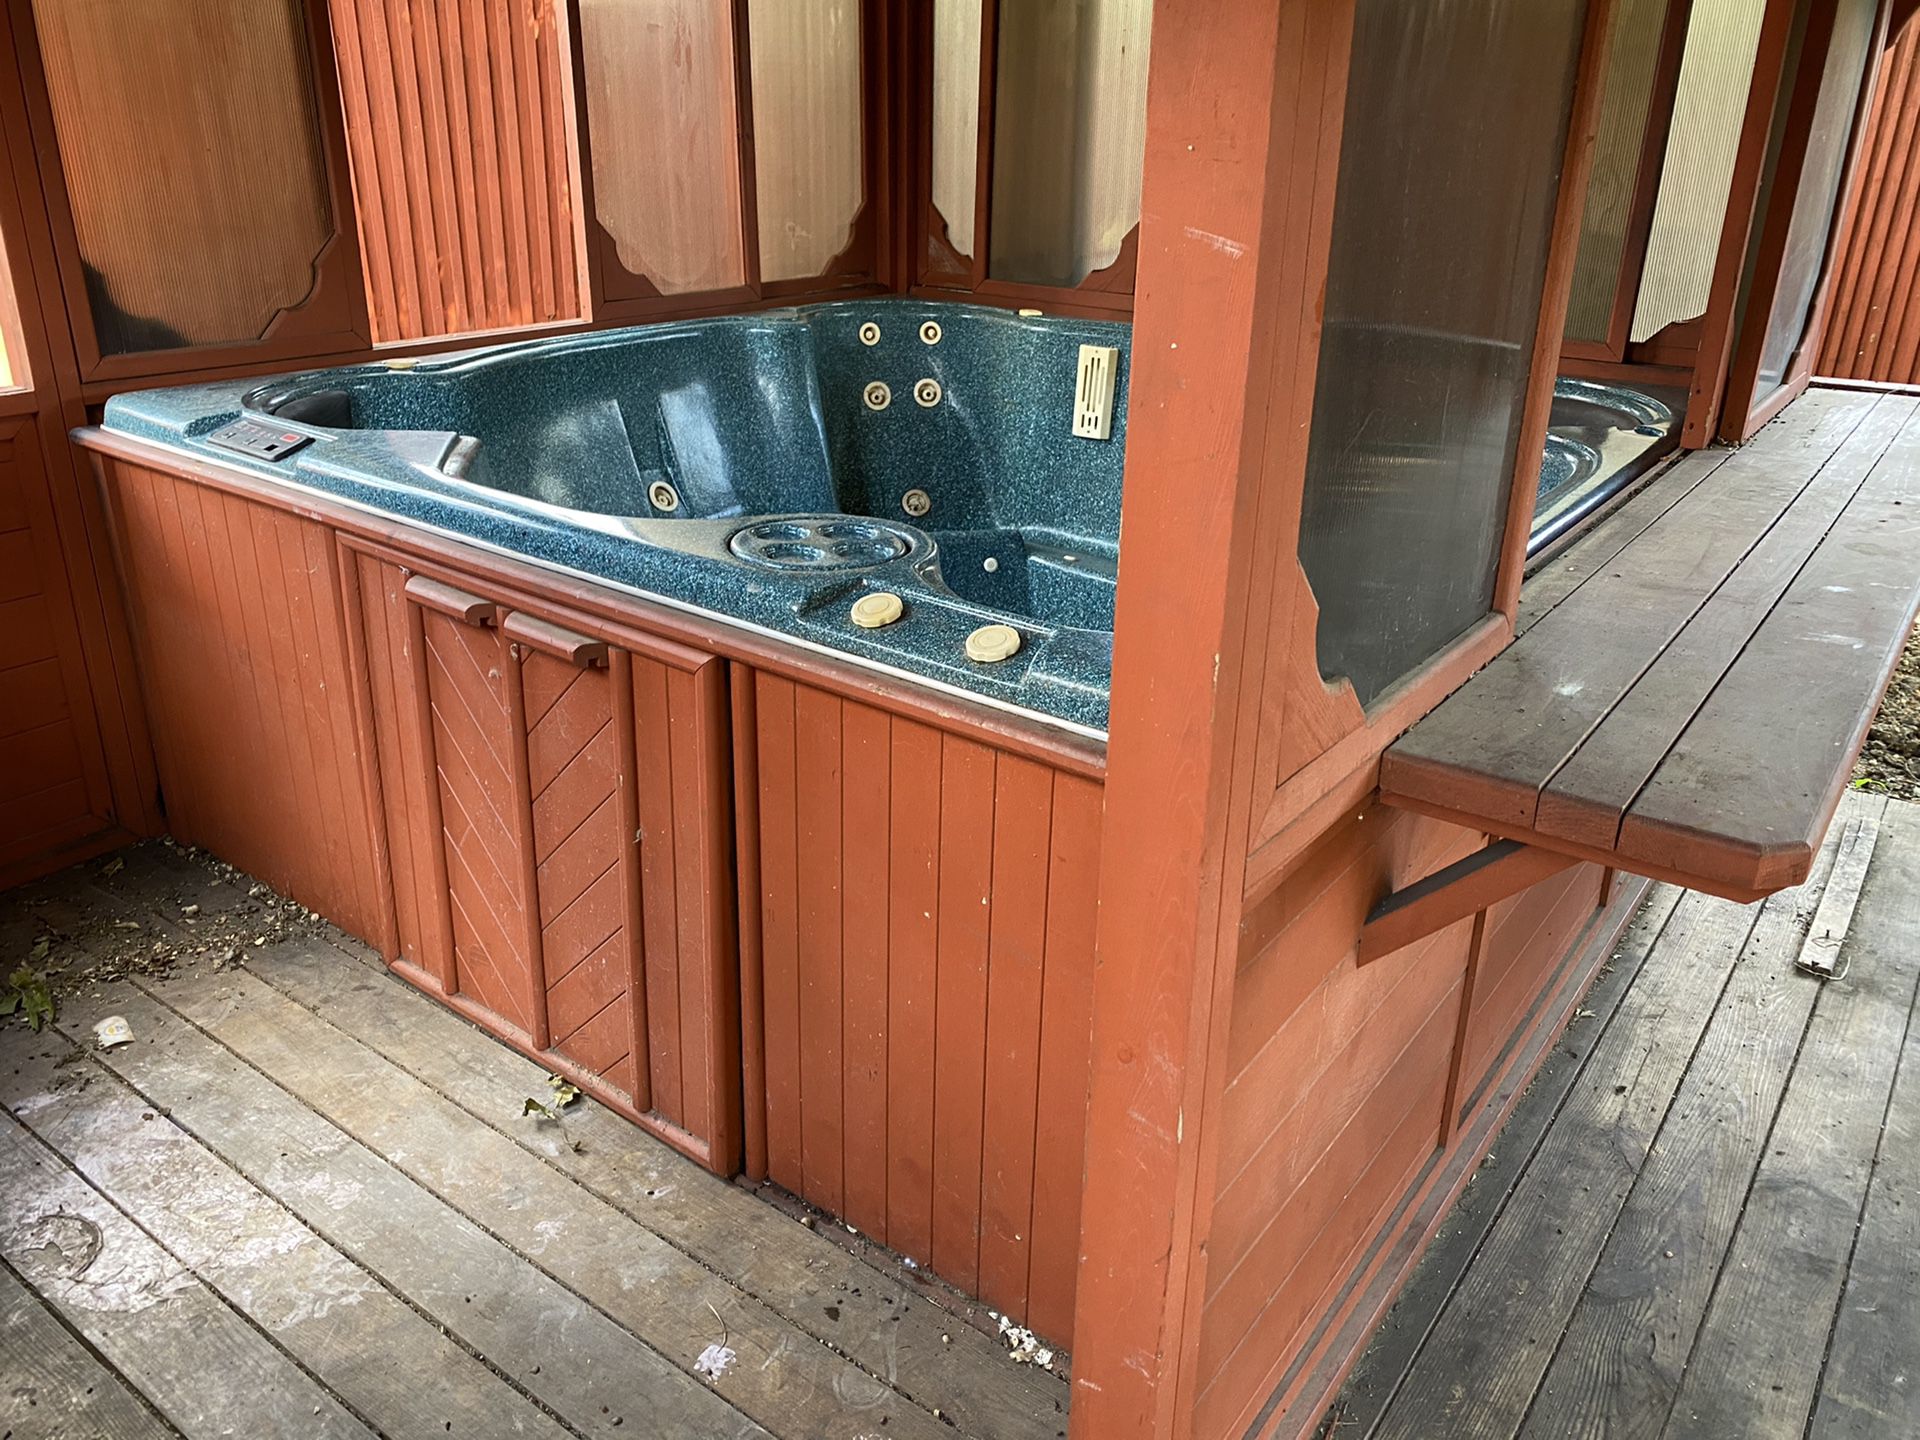 Hot tub and pergola for sale. Only $400 for everything!